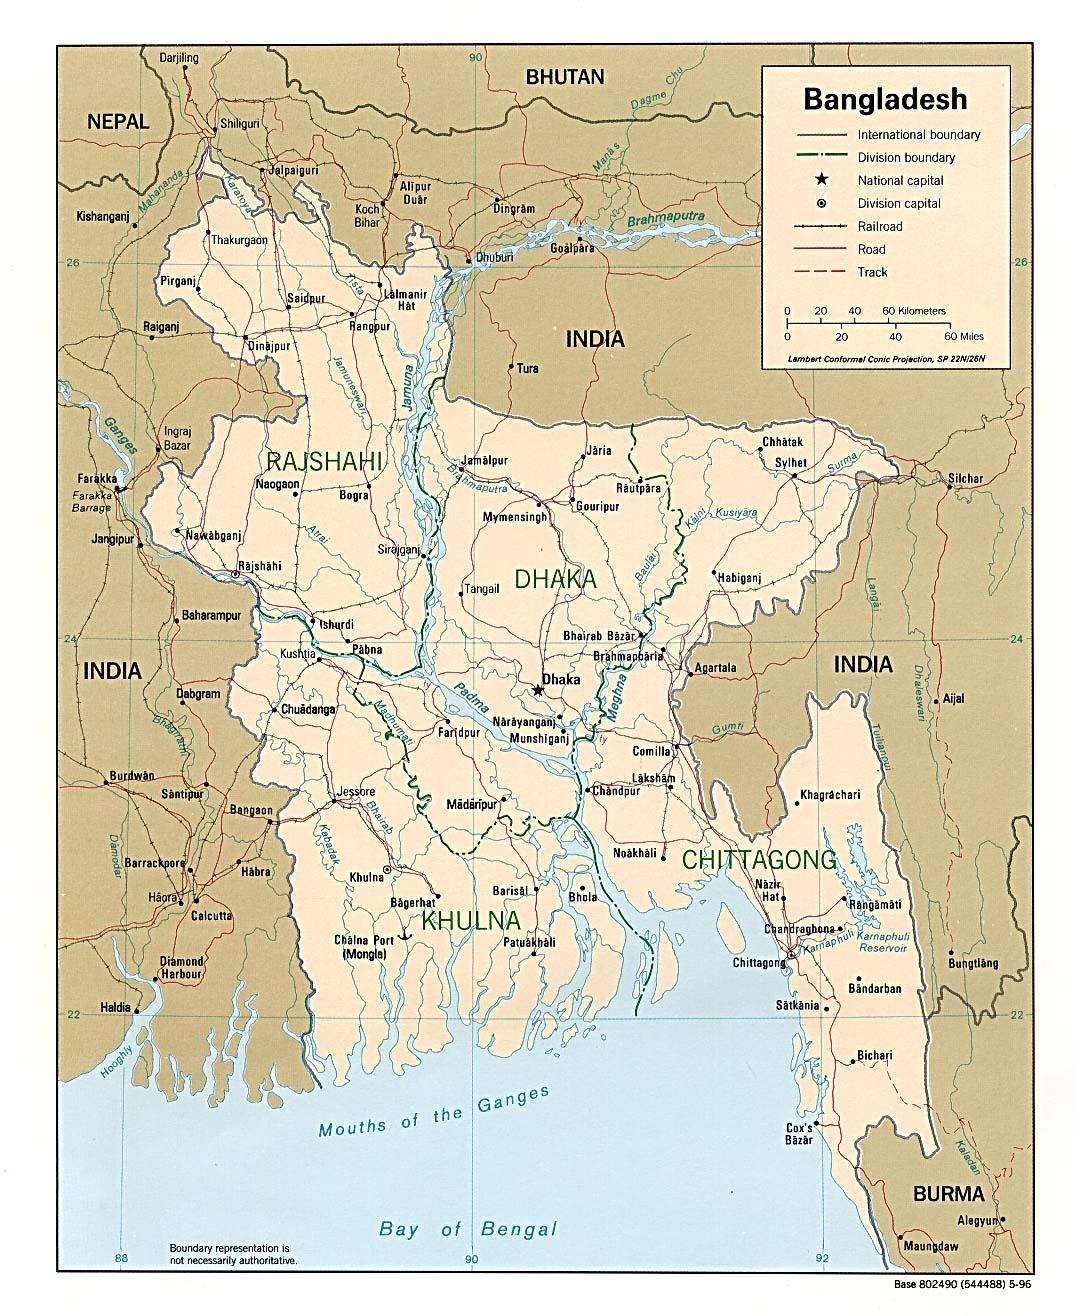 Bangladesh (image in Collection)